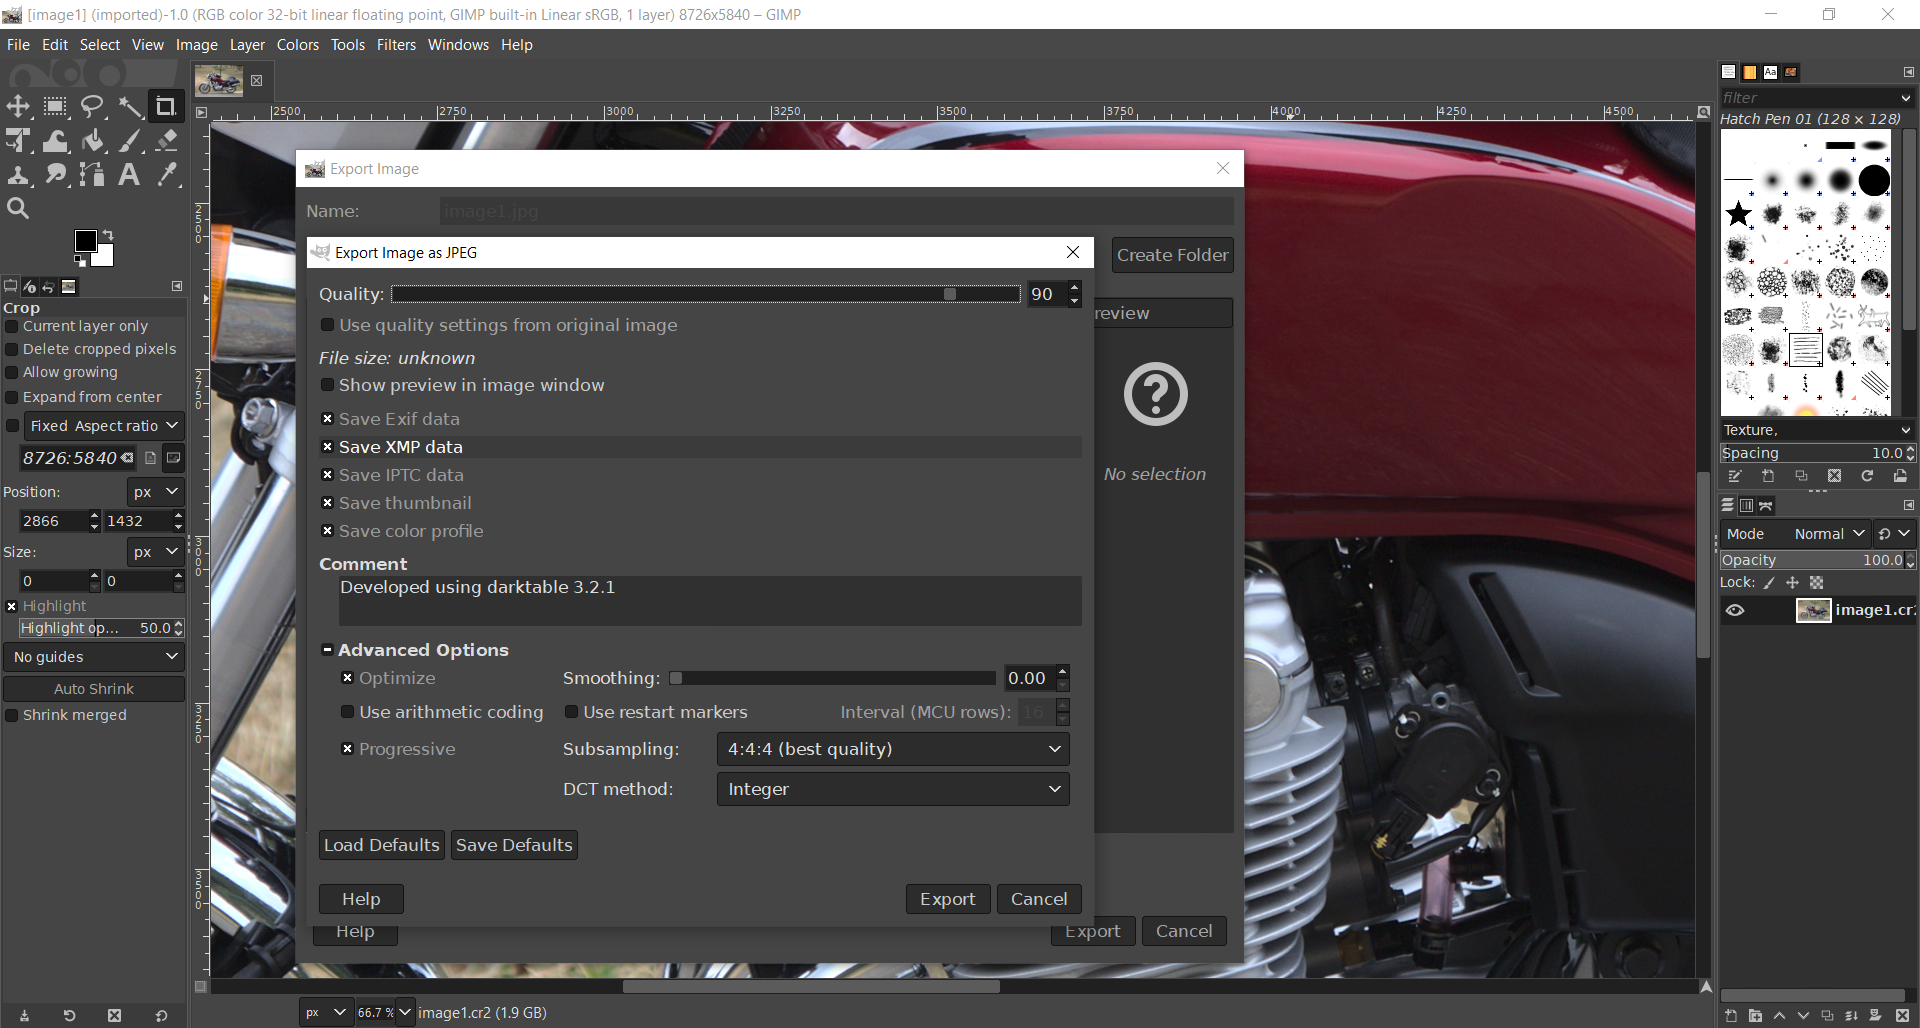 Why you should use GIMP as the best RAW converter and image editing tool?